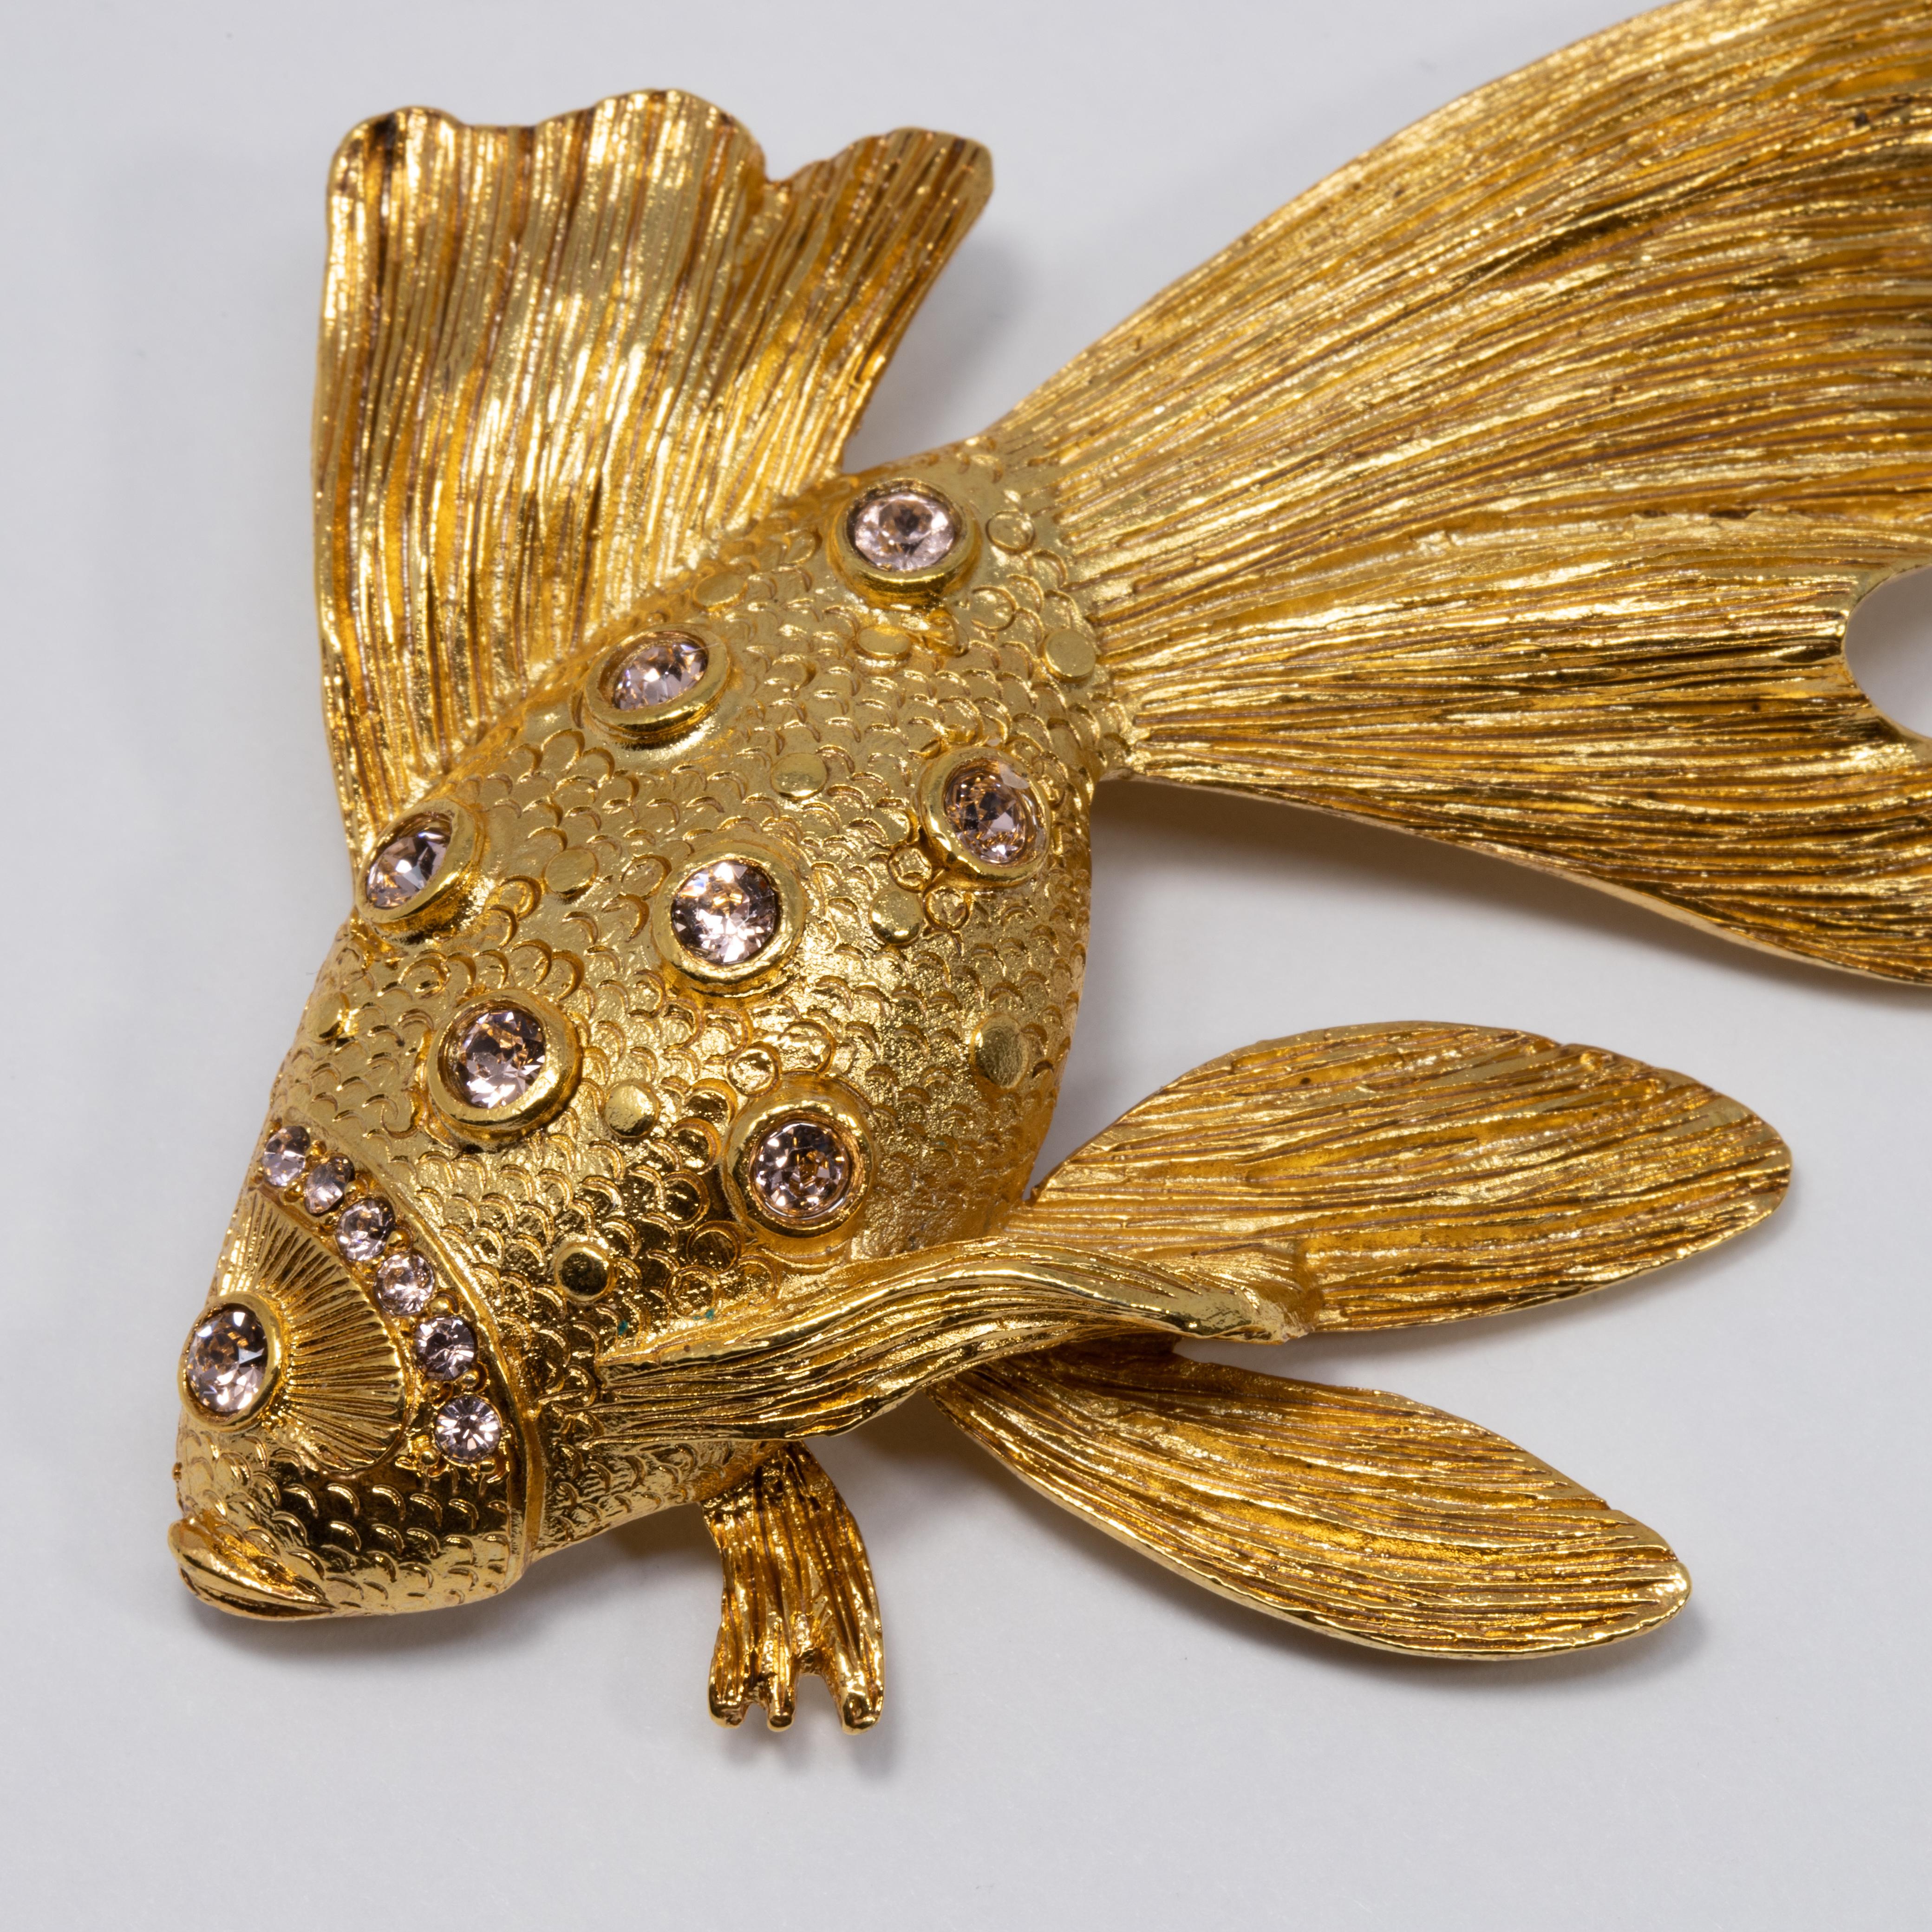 Perfect your look with this gold-tone fish brooch set with sparkling Swarovski crystals. For the perfect marine aesthetic!

Hallmarks: Oscar de la Renta, Made in USA